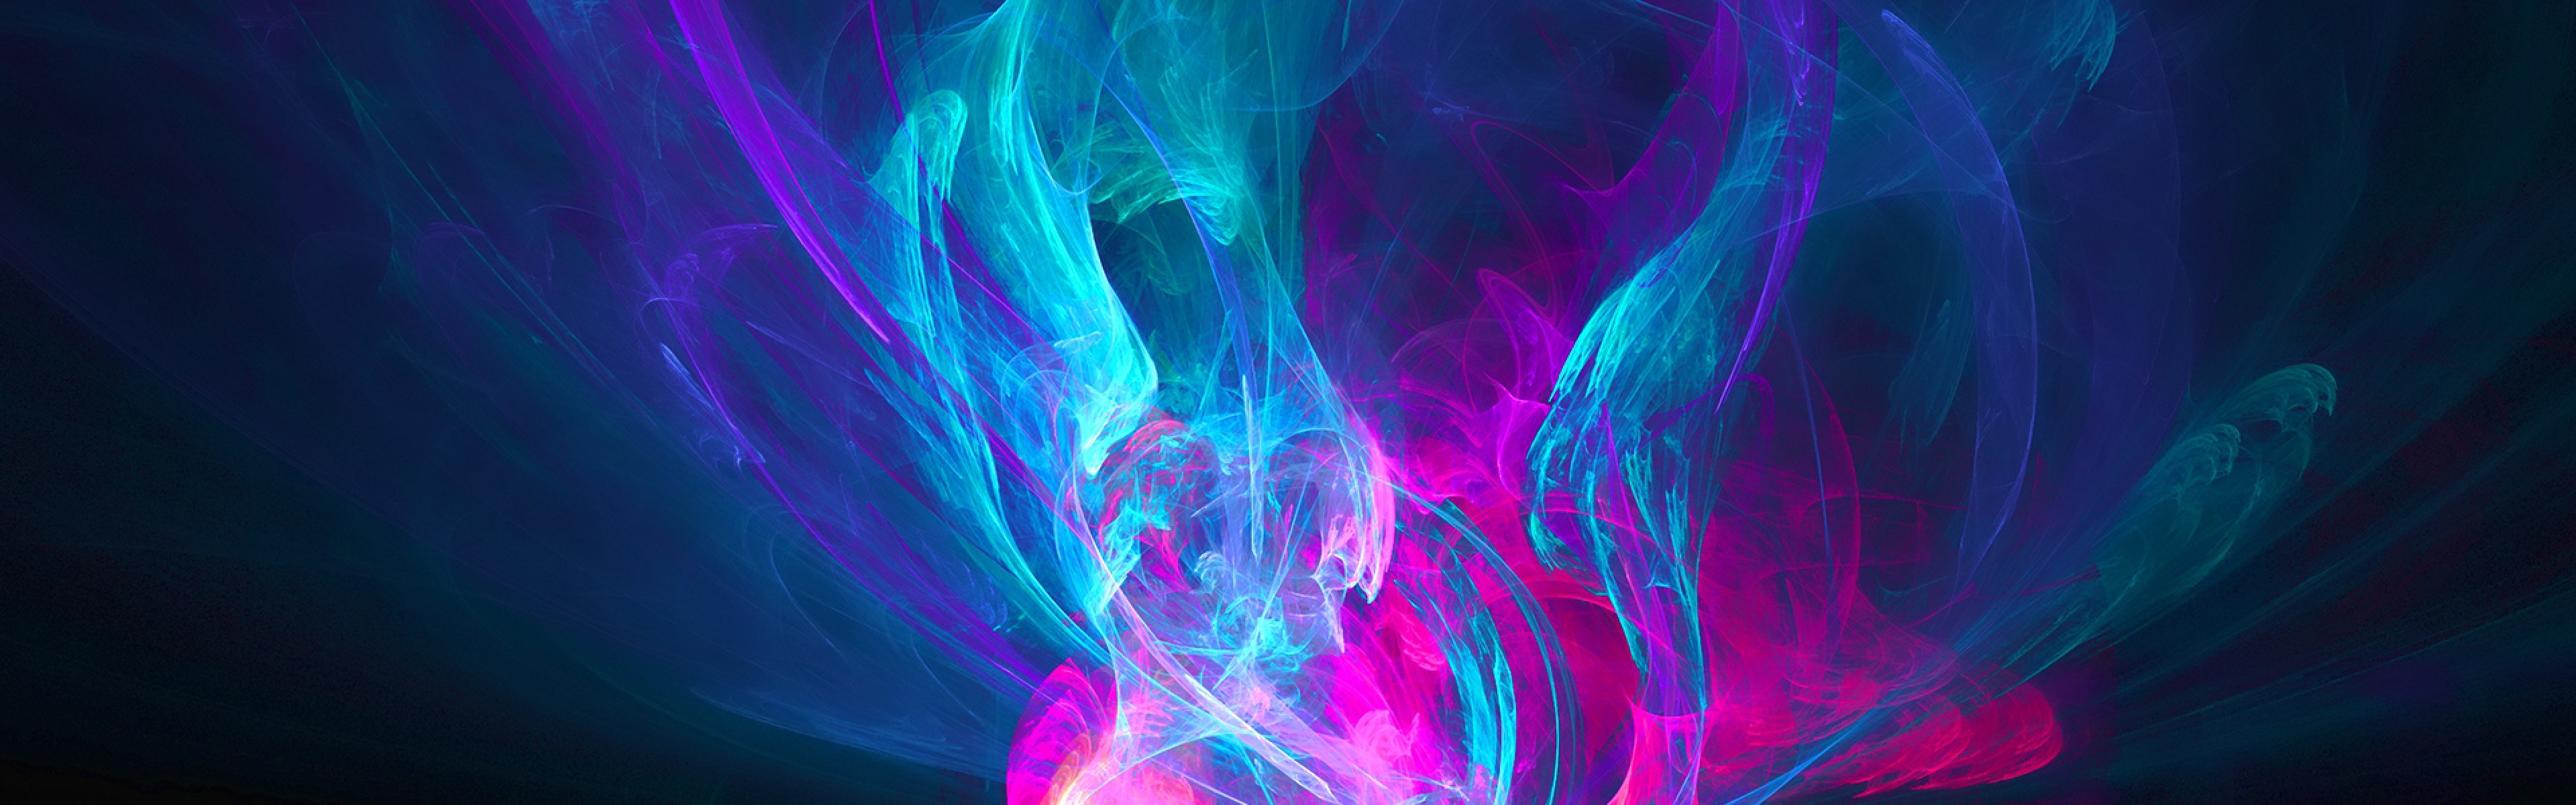 Free download 3840x1200 Wallpaper abstraction light pink ...